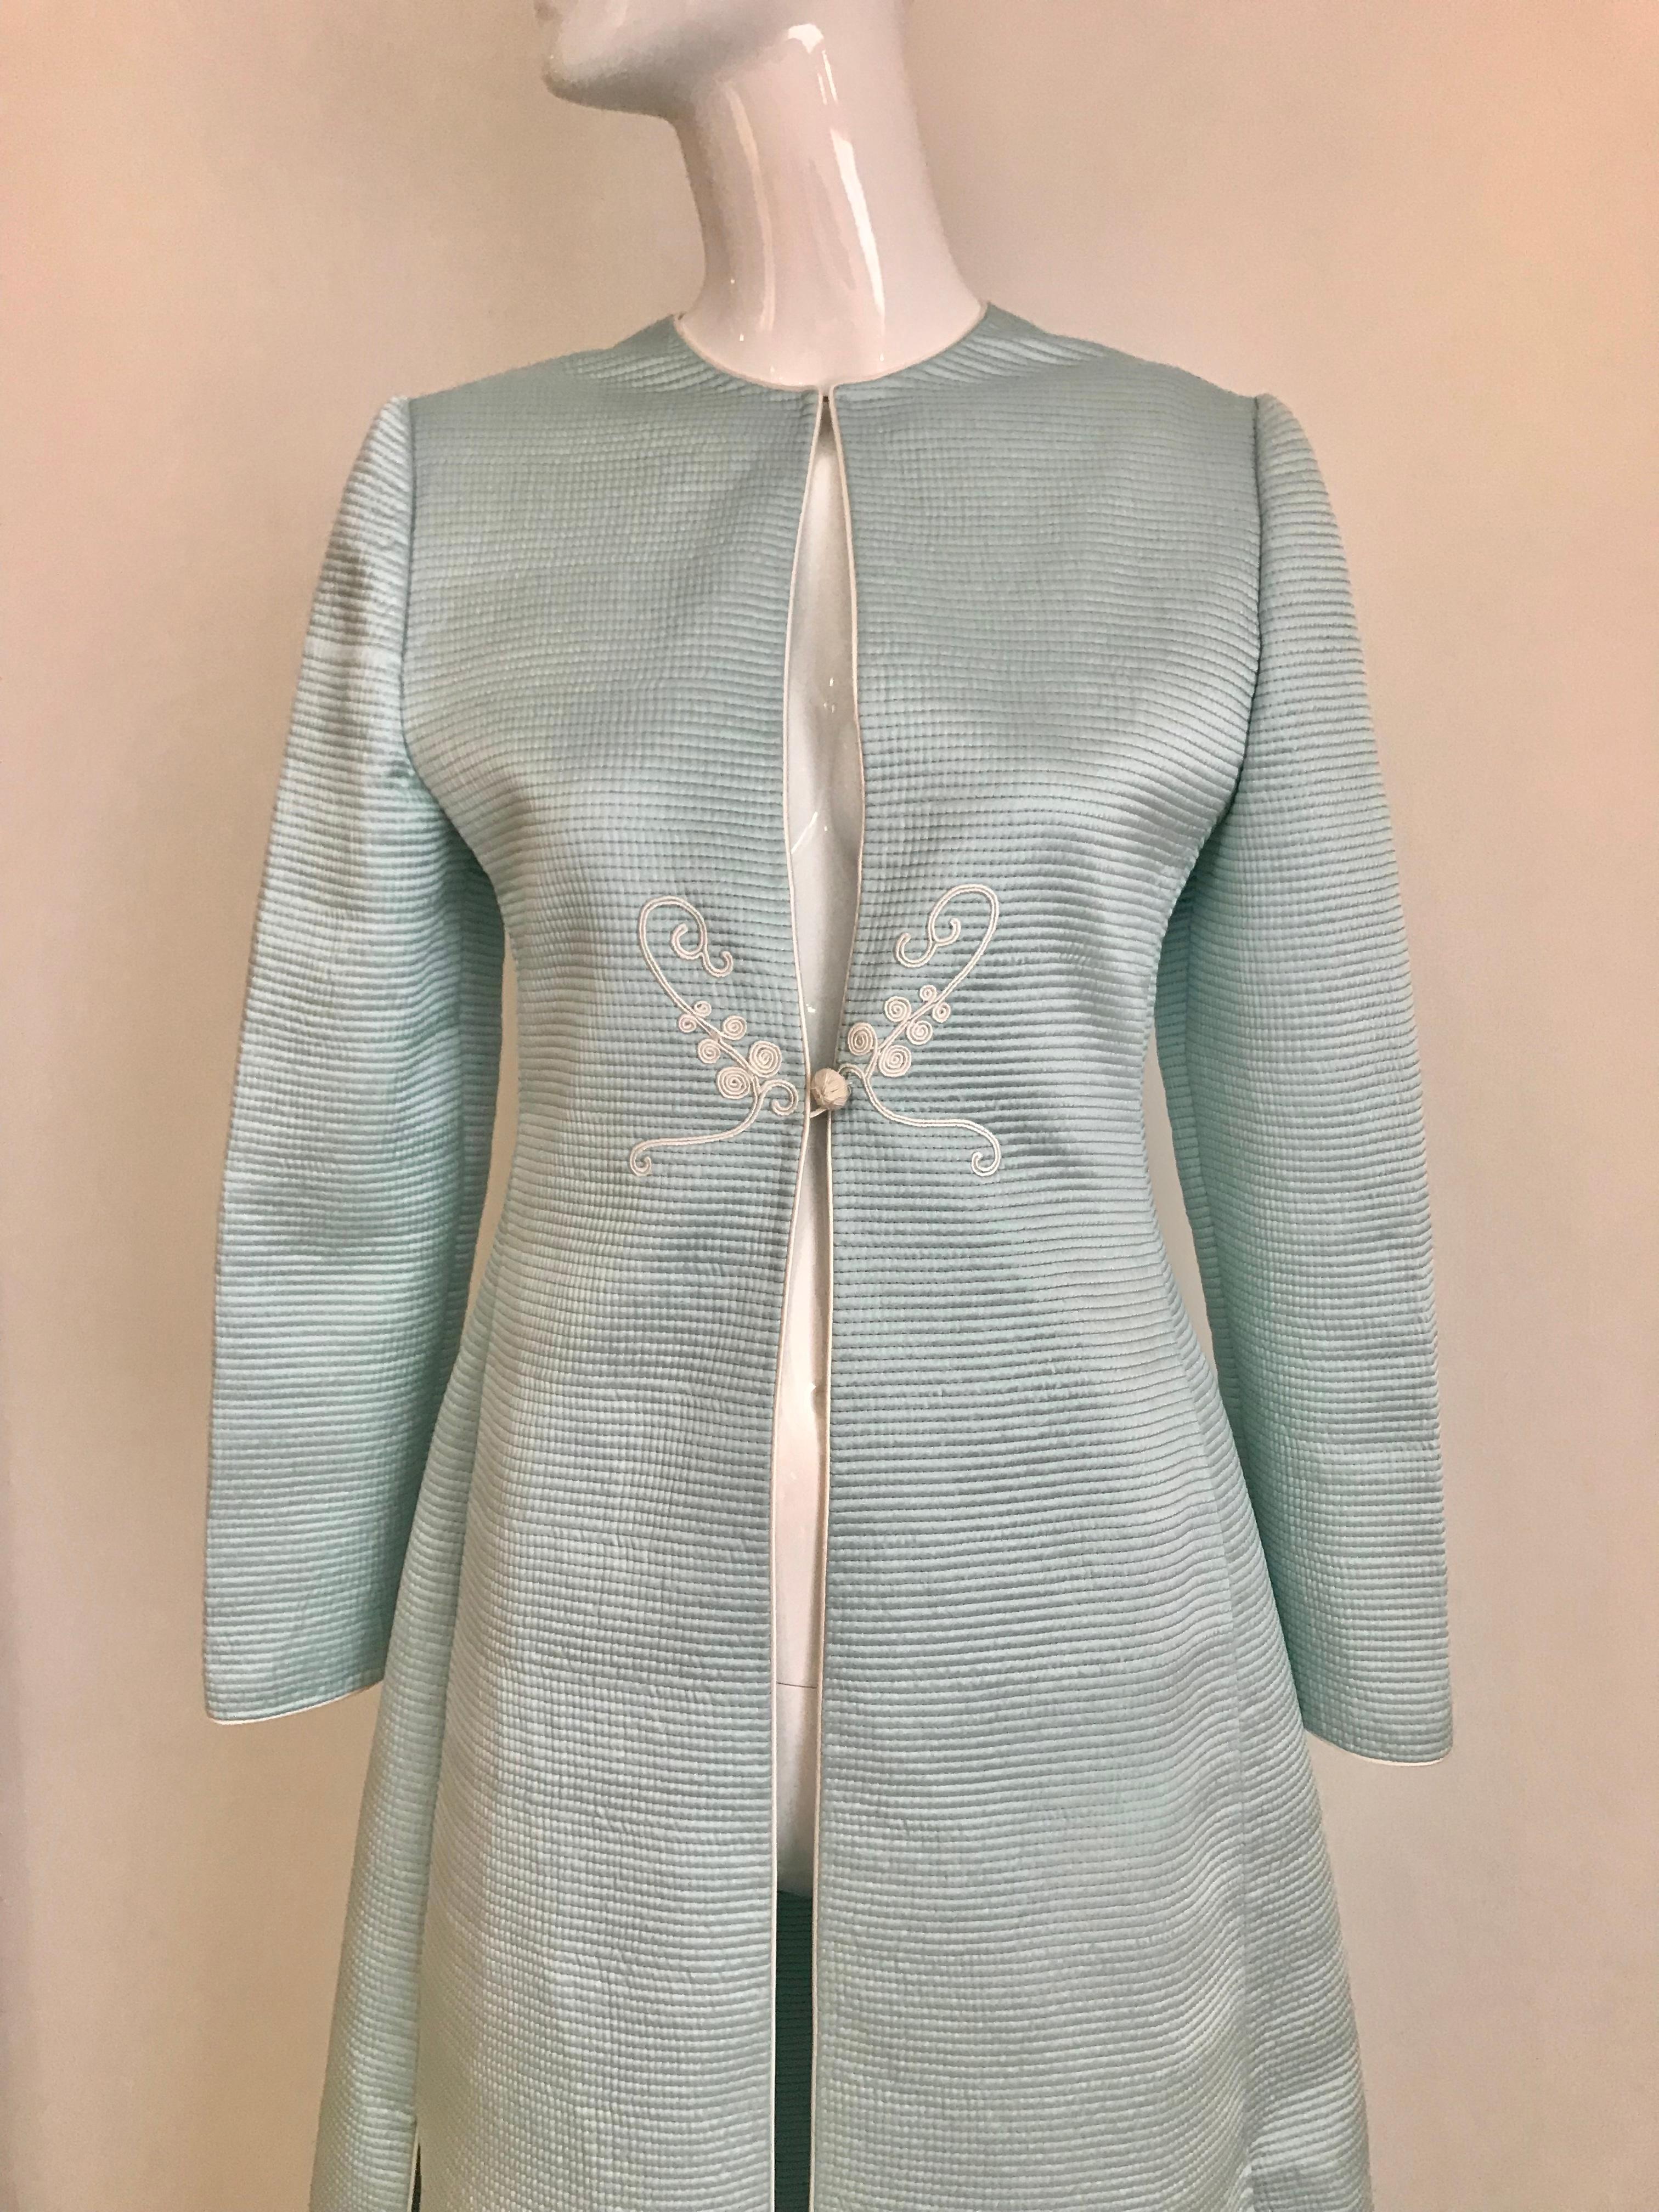 Vintage Mary McFadden light blue quilted silk coat with frogs closure . Slim fitting.
Size: fit US 4 or 6
